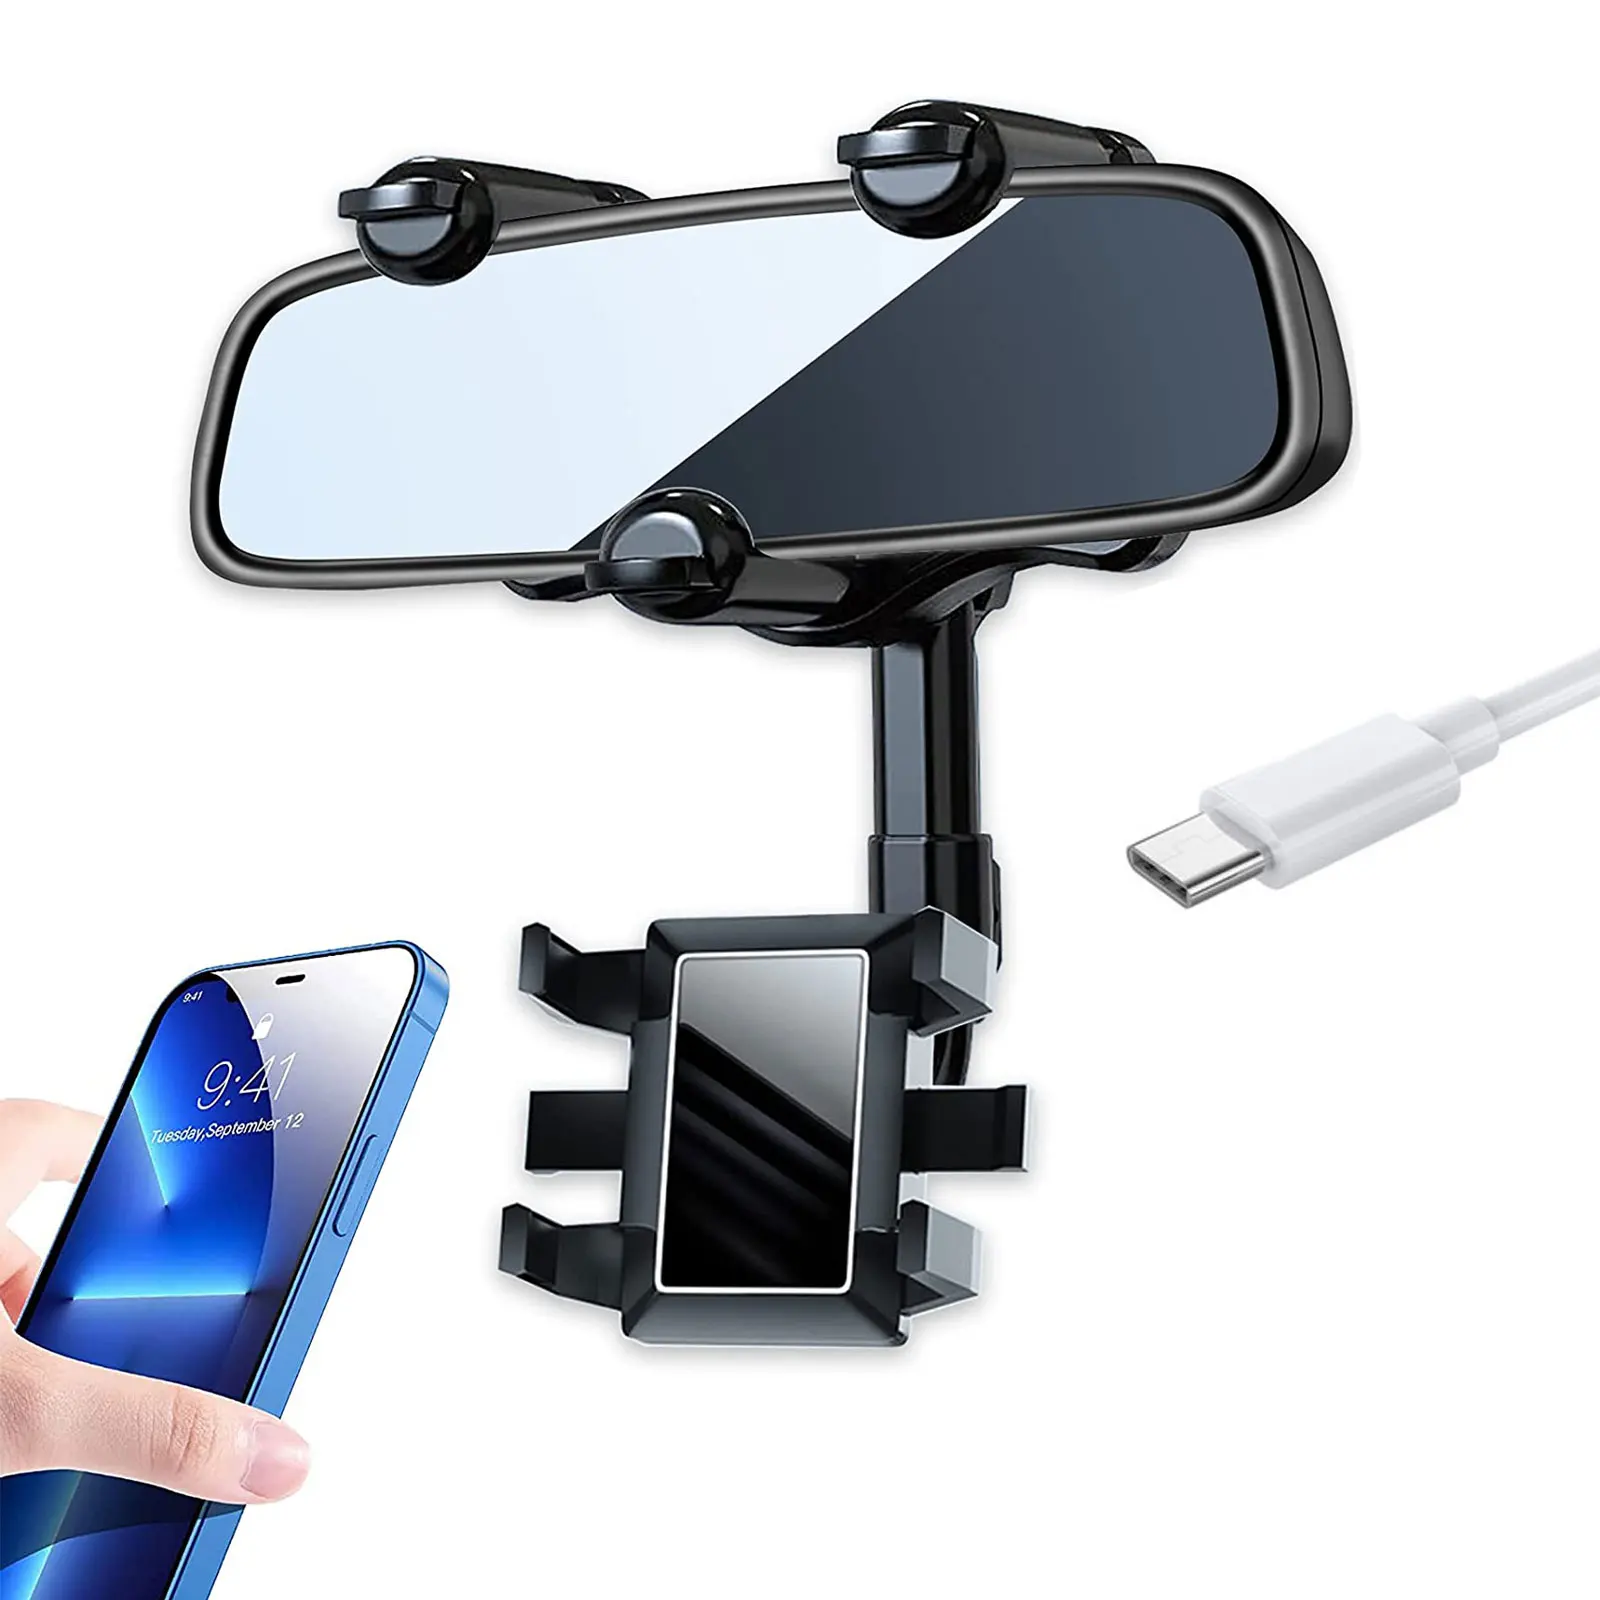 

Rearview Mirror Phone Holder for Car,Rotatable and Retractable Car Phone Holder with Adjustable Length Upgraded for All Phones